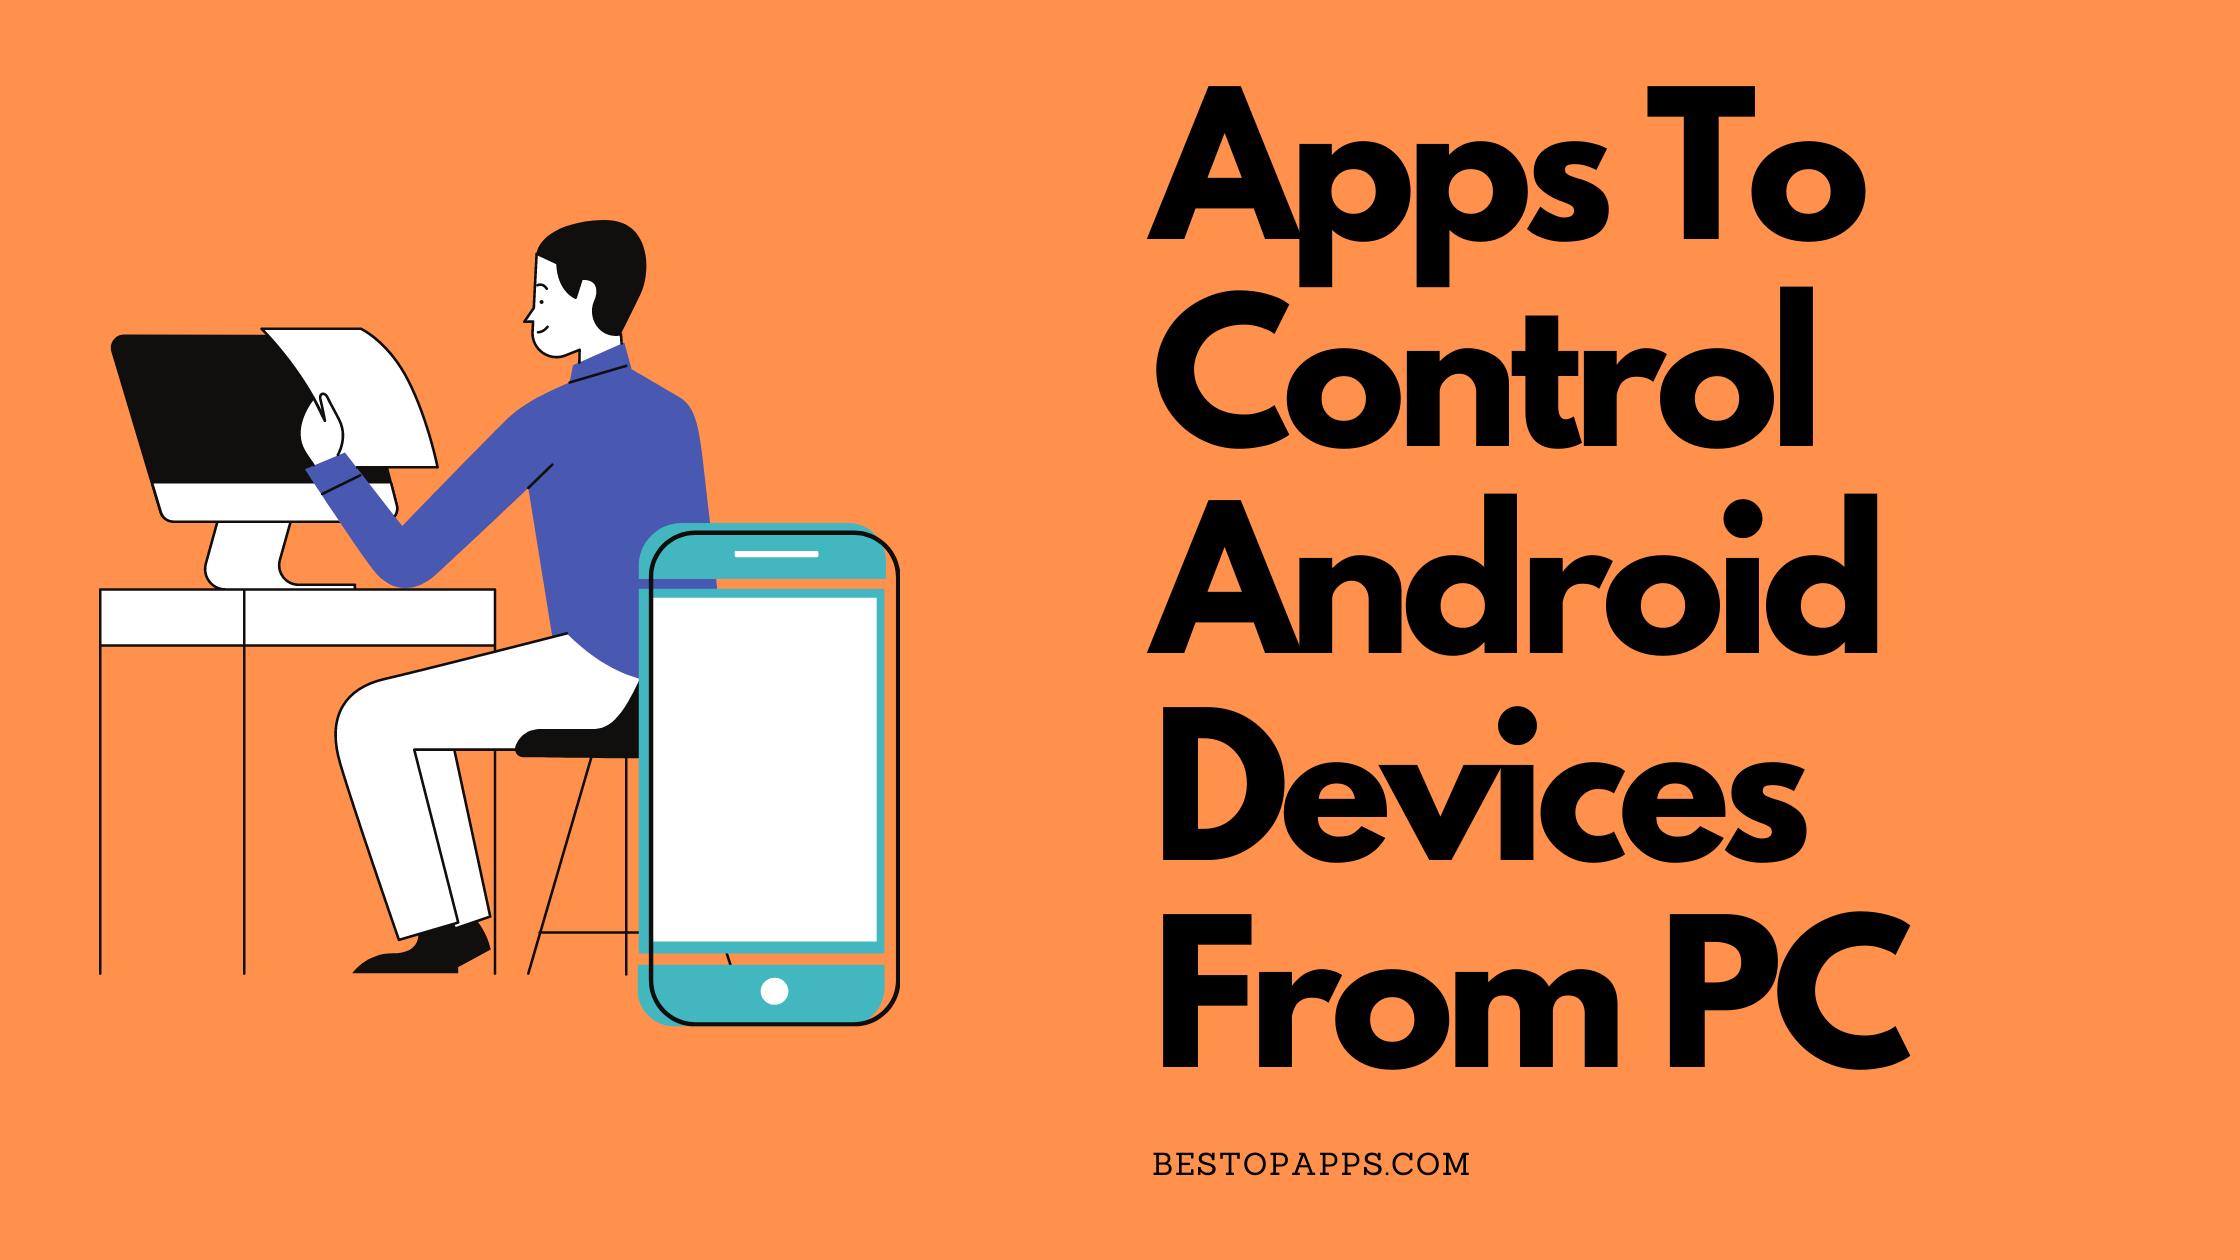 Apps To Control Android Devices From PC